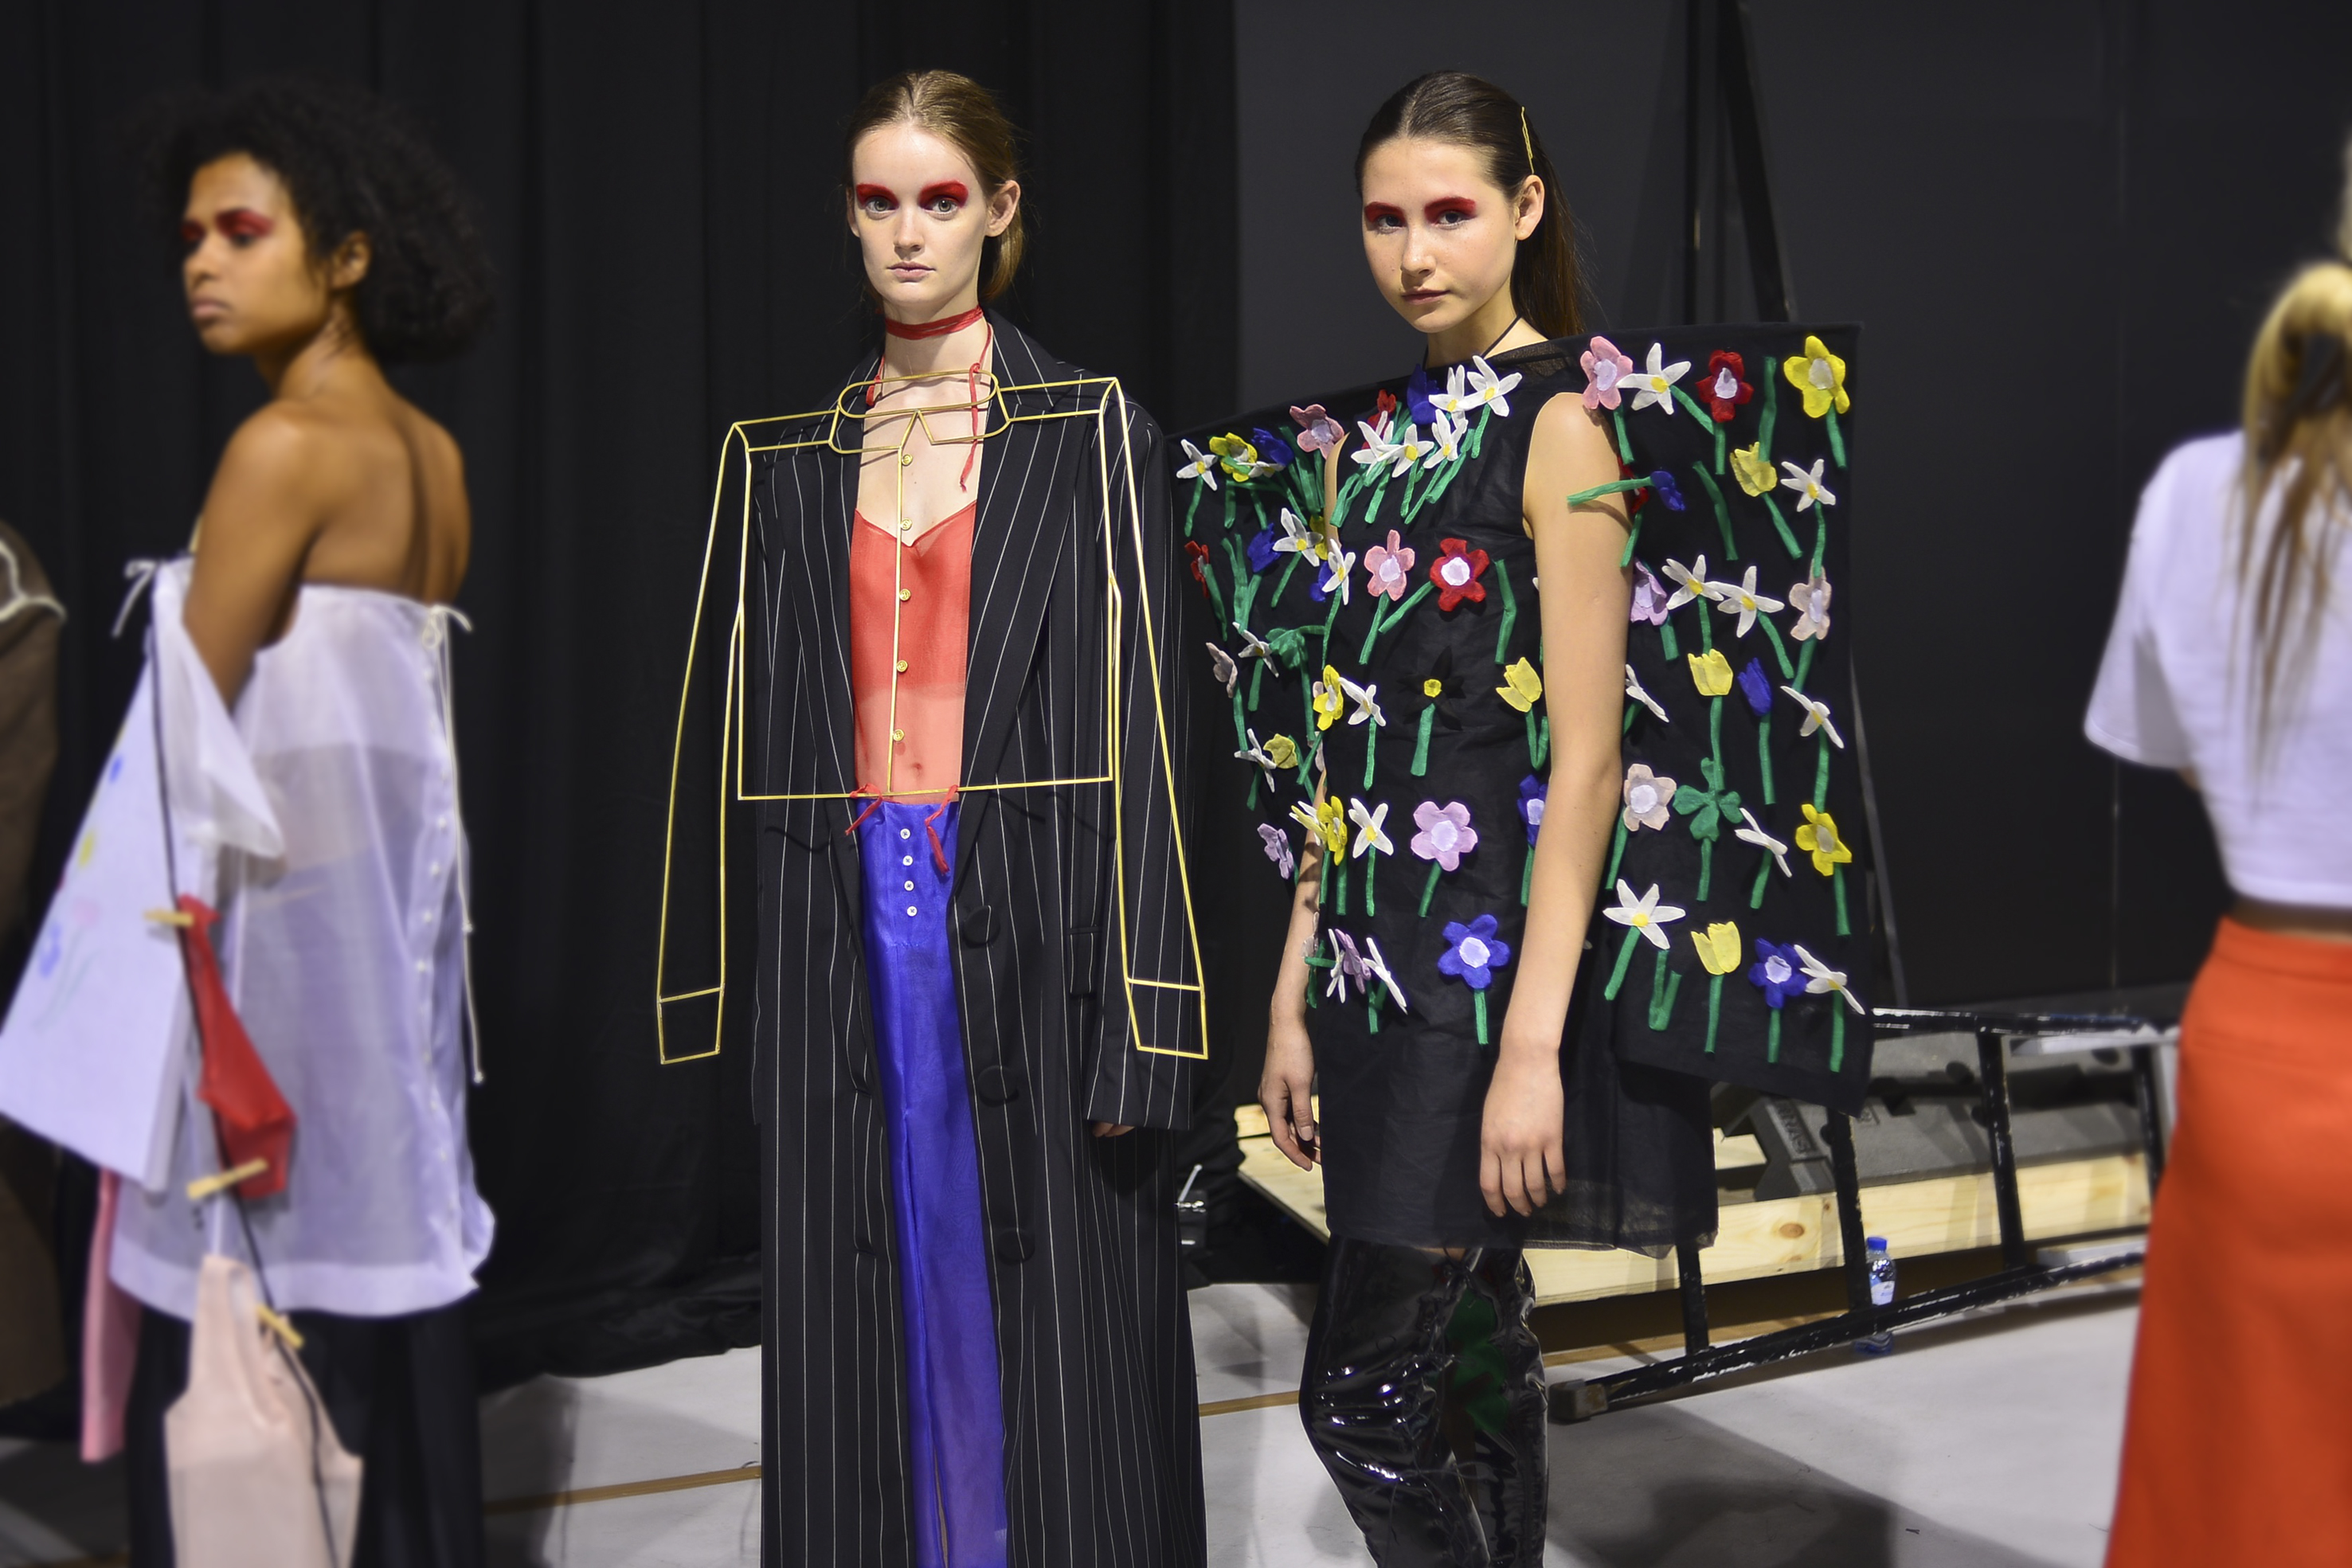 Fashion degrees sewing international seeds: A view from the runway